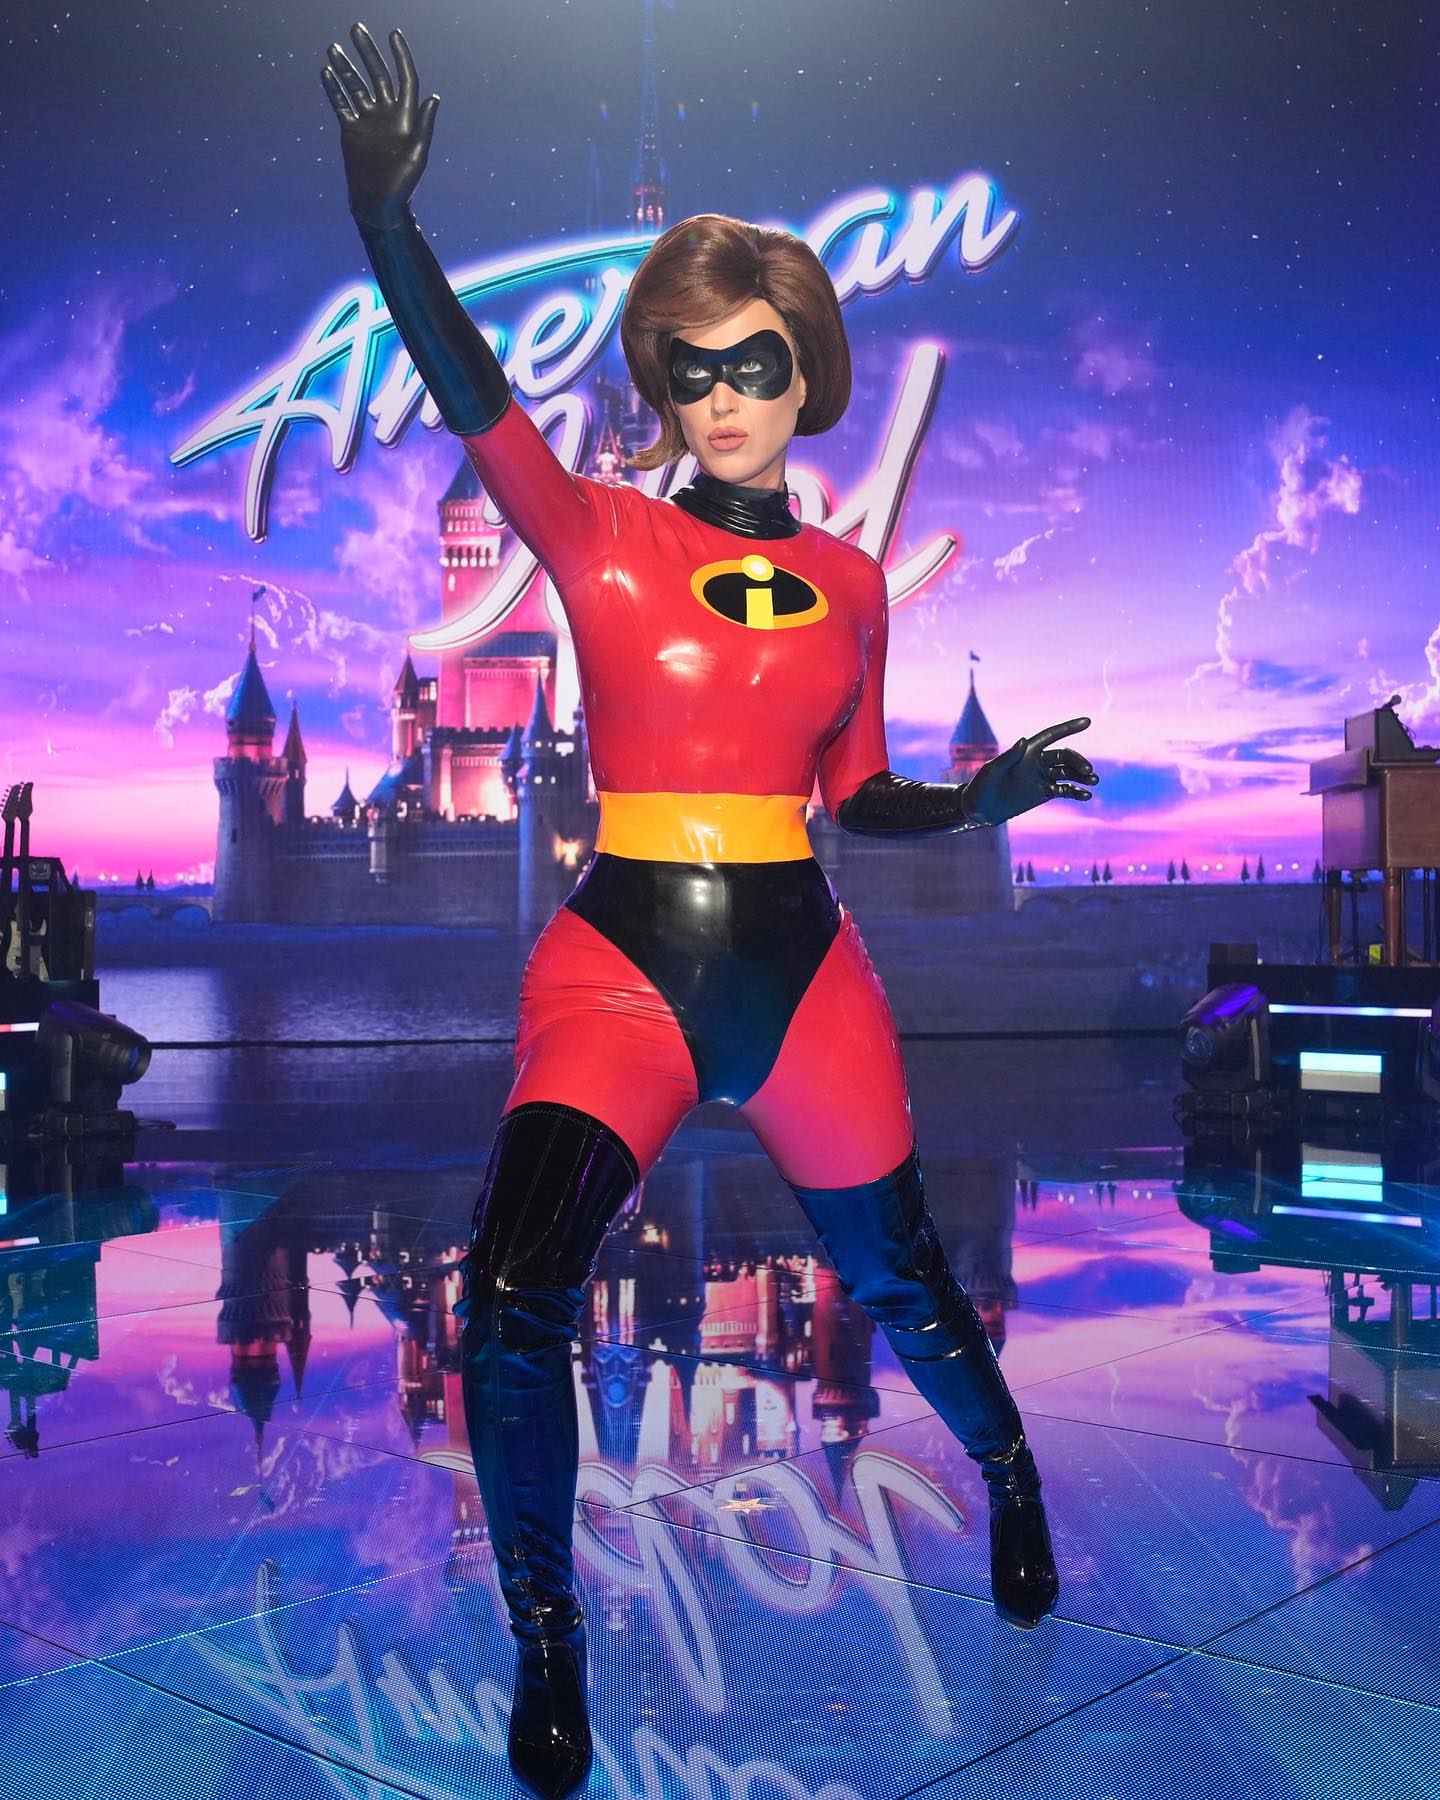 Katy Perry in Incredibles Cosplay for the Nerds! - Photo 3